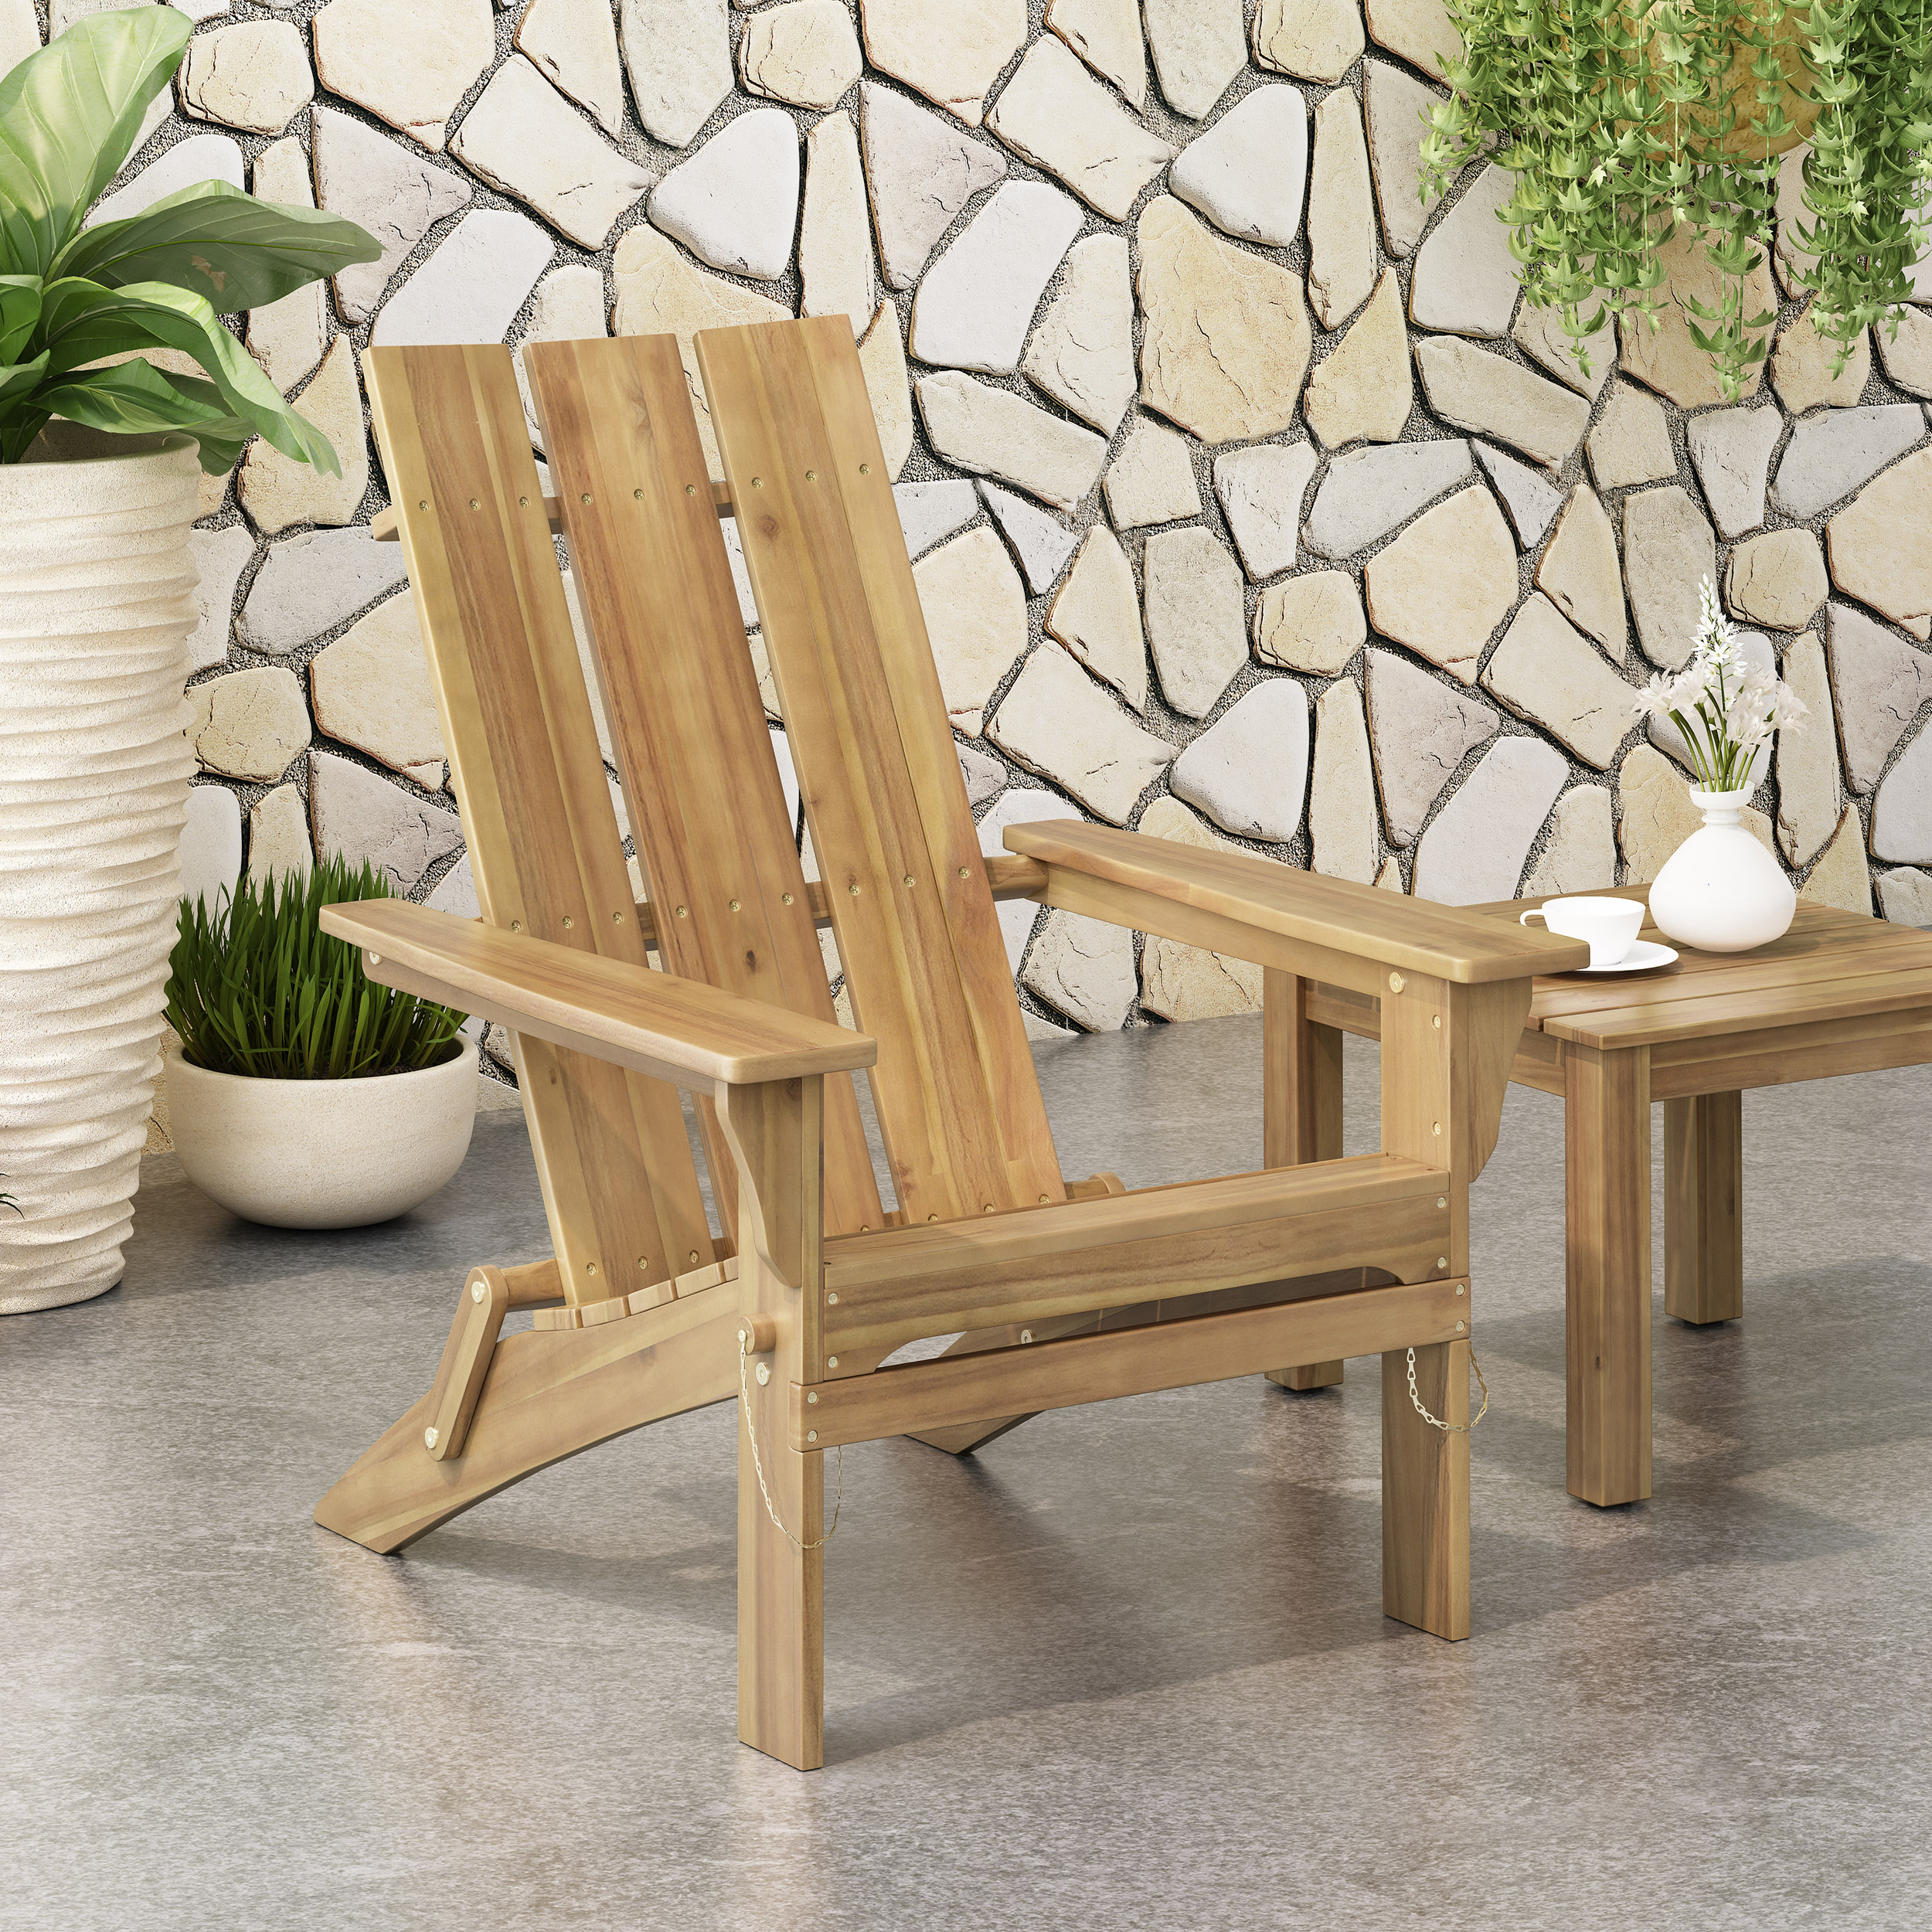 KUIKUI Outdoor Classic Natural Color Solid Wood Adirondack Chair Garden Lounge Chair - image 2 of 5